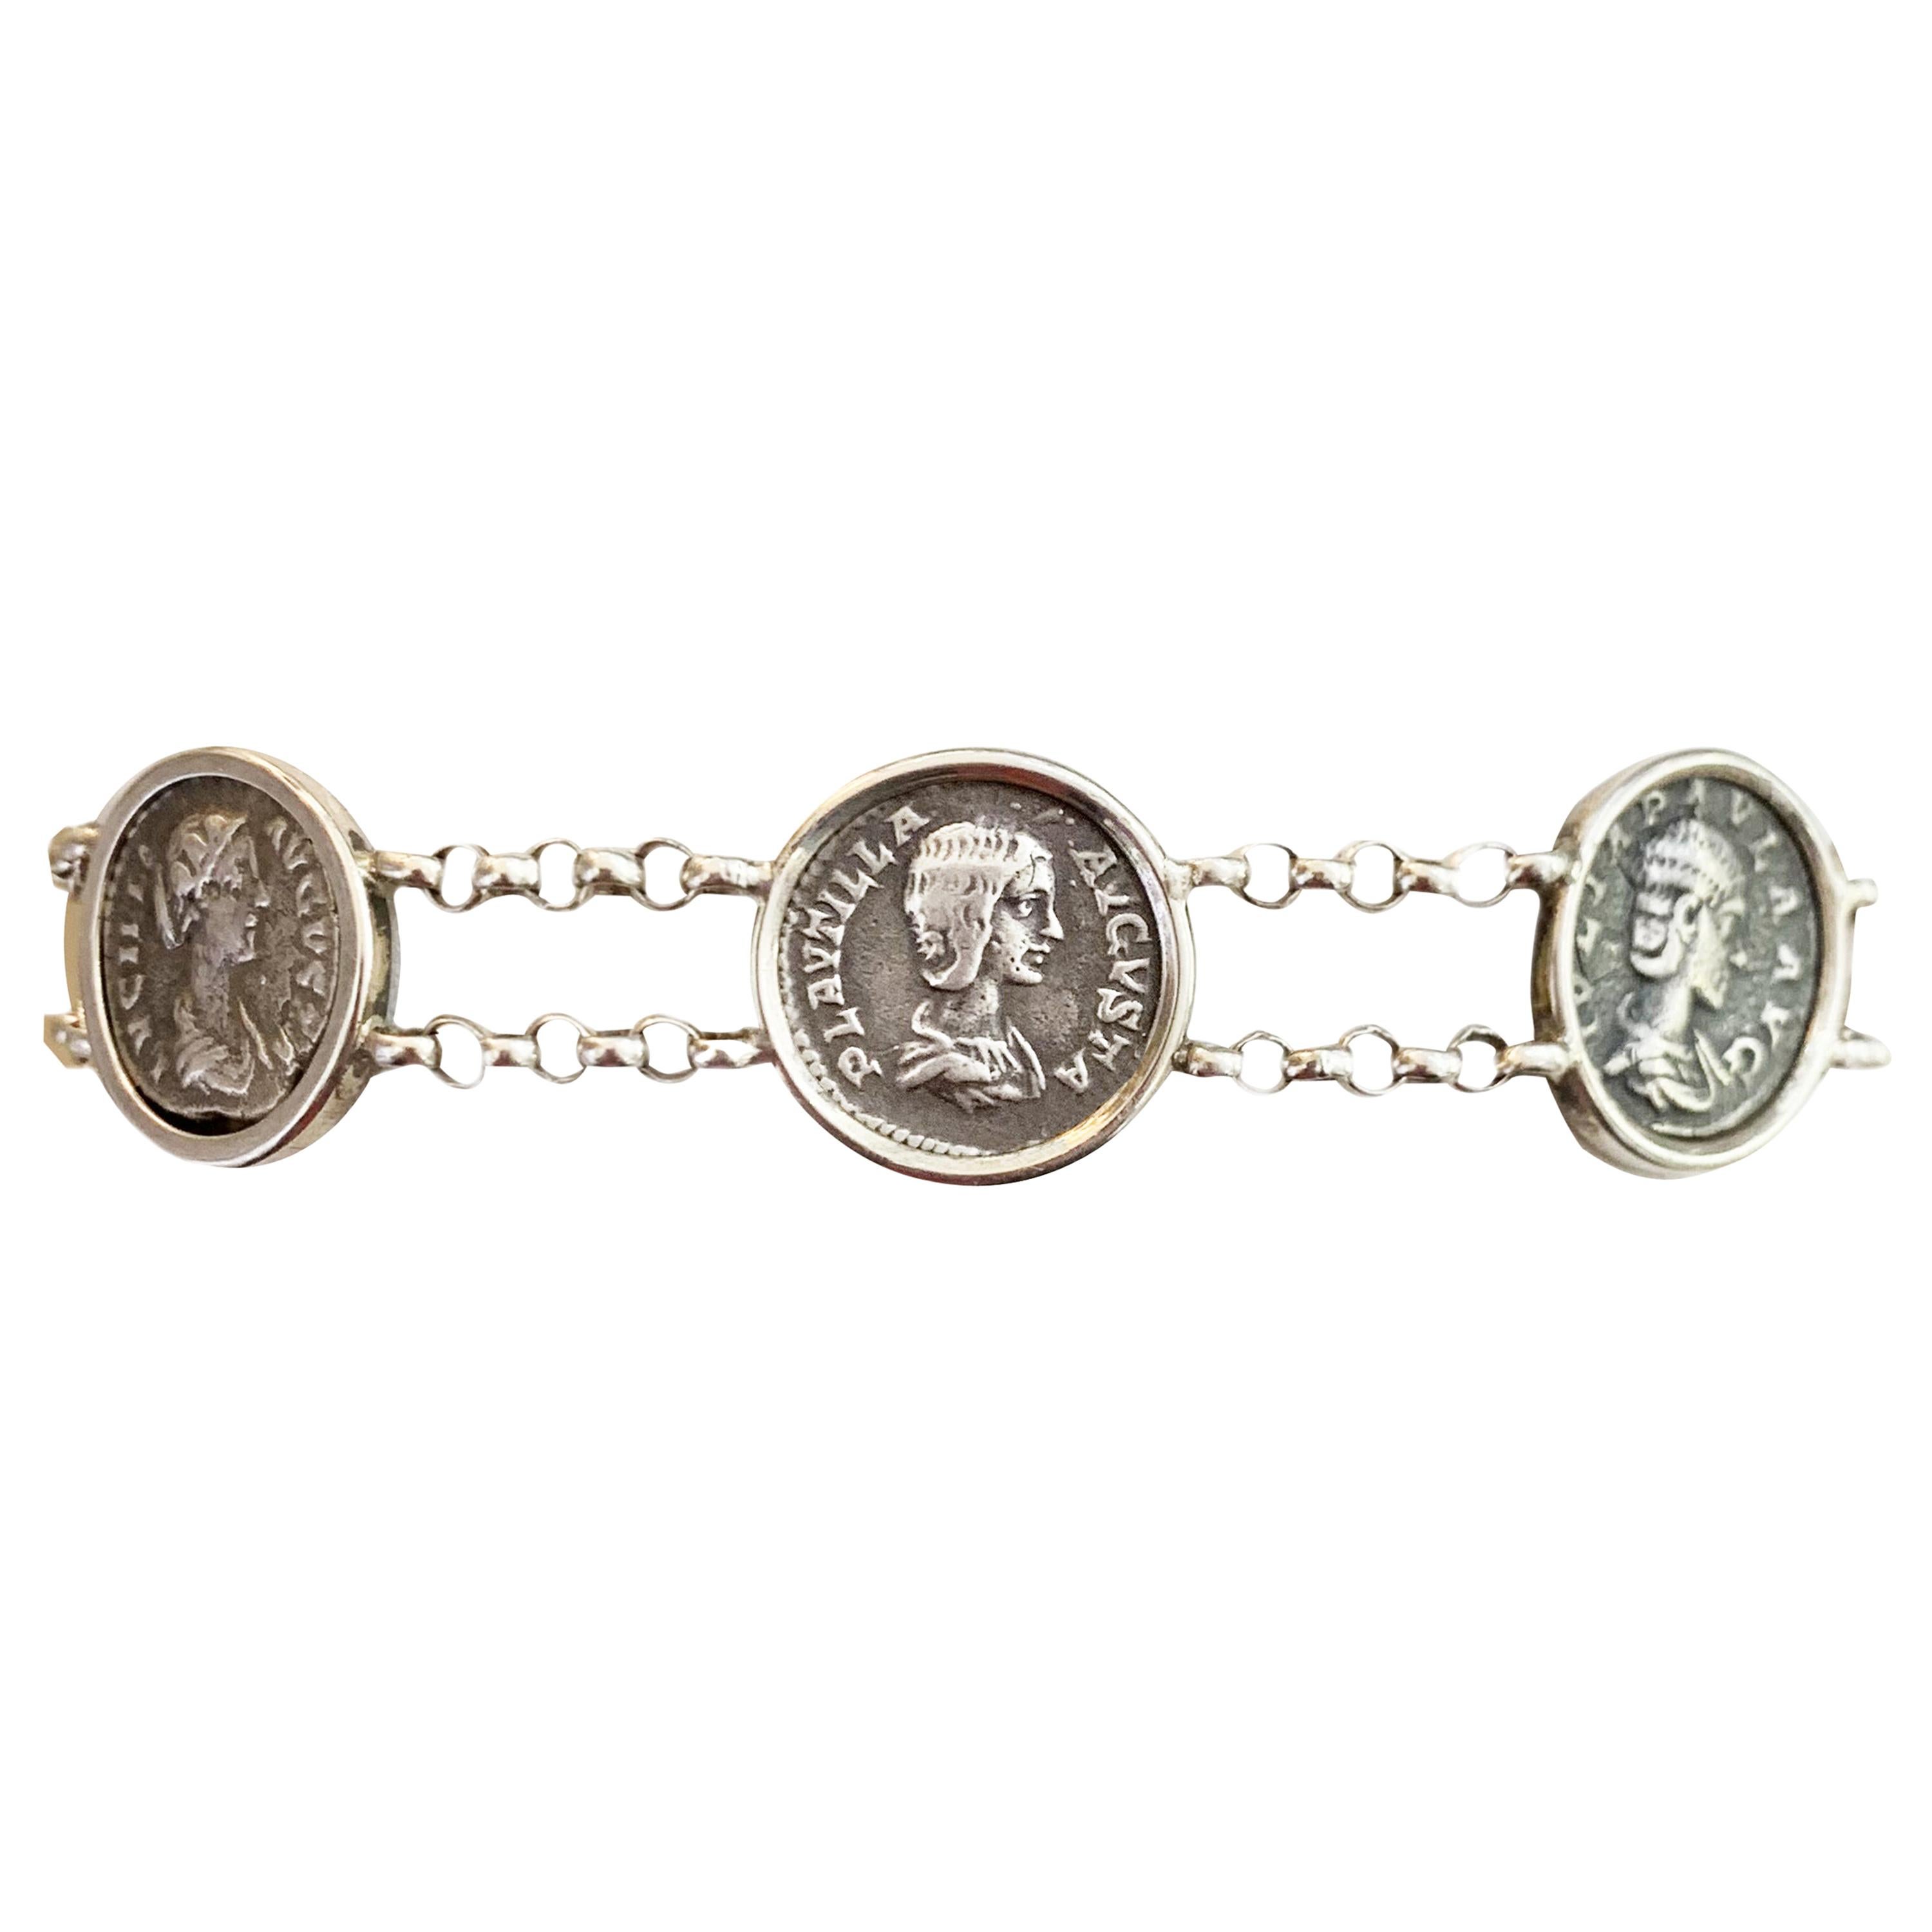 Sterling Silver Bracelet with 5 Roman Coins Depicting 5 Important Roman Woman